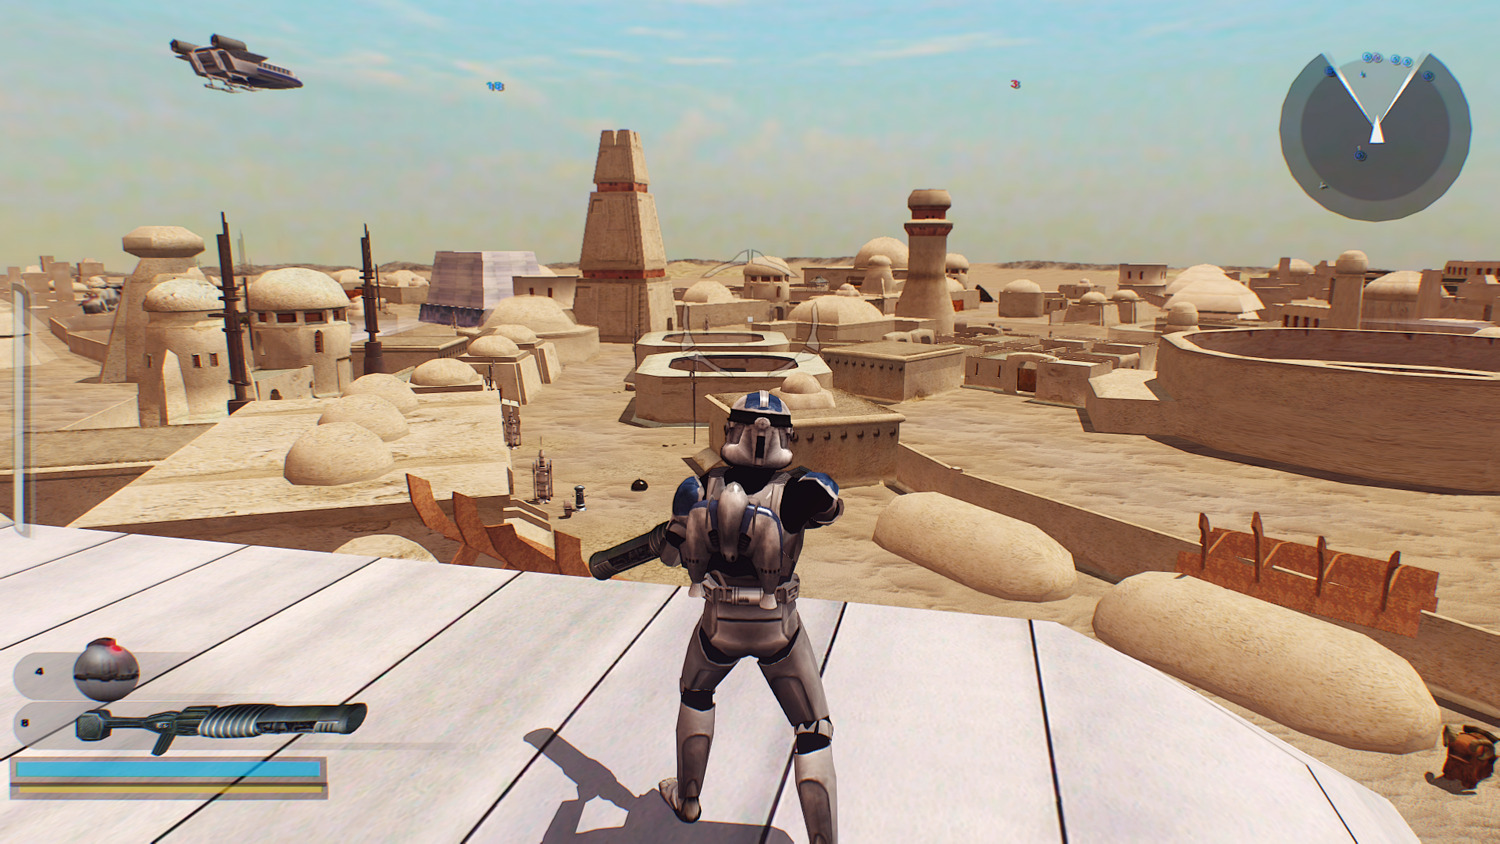 Star Wars Battlefront 2 2005 Graphics Mod Gives the Game Updated Visuals